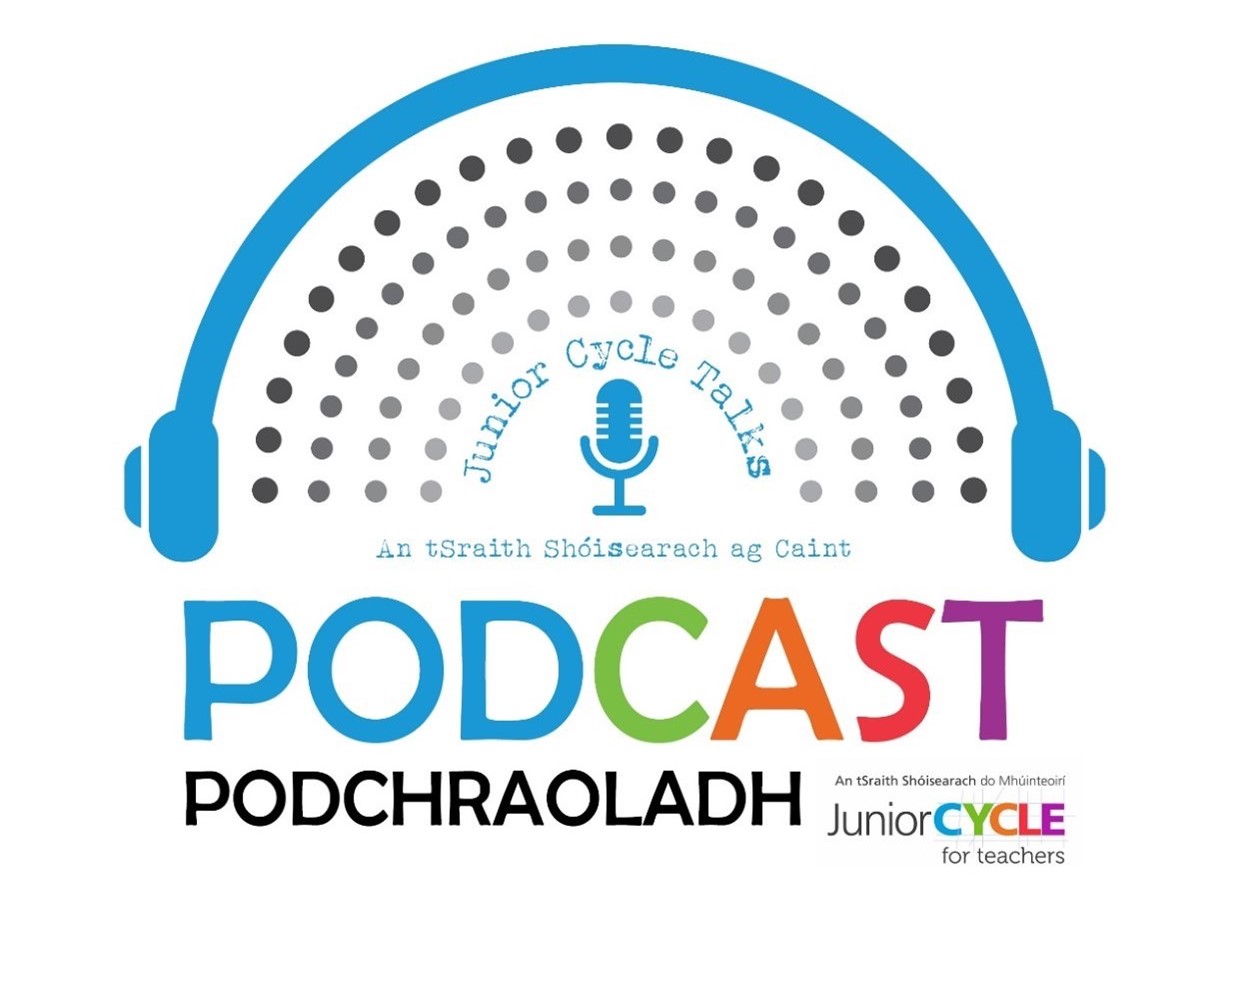 Podcast 1 Physical Literacy and Key Skills